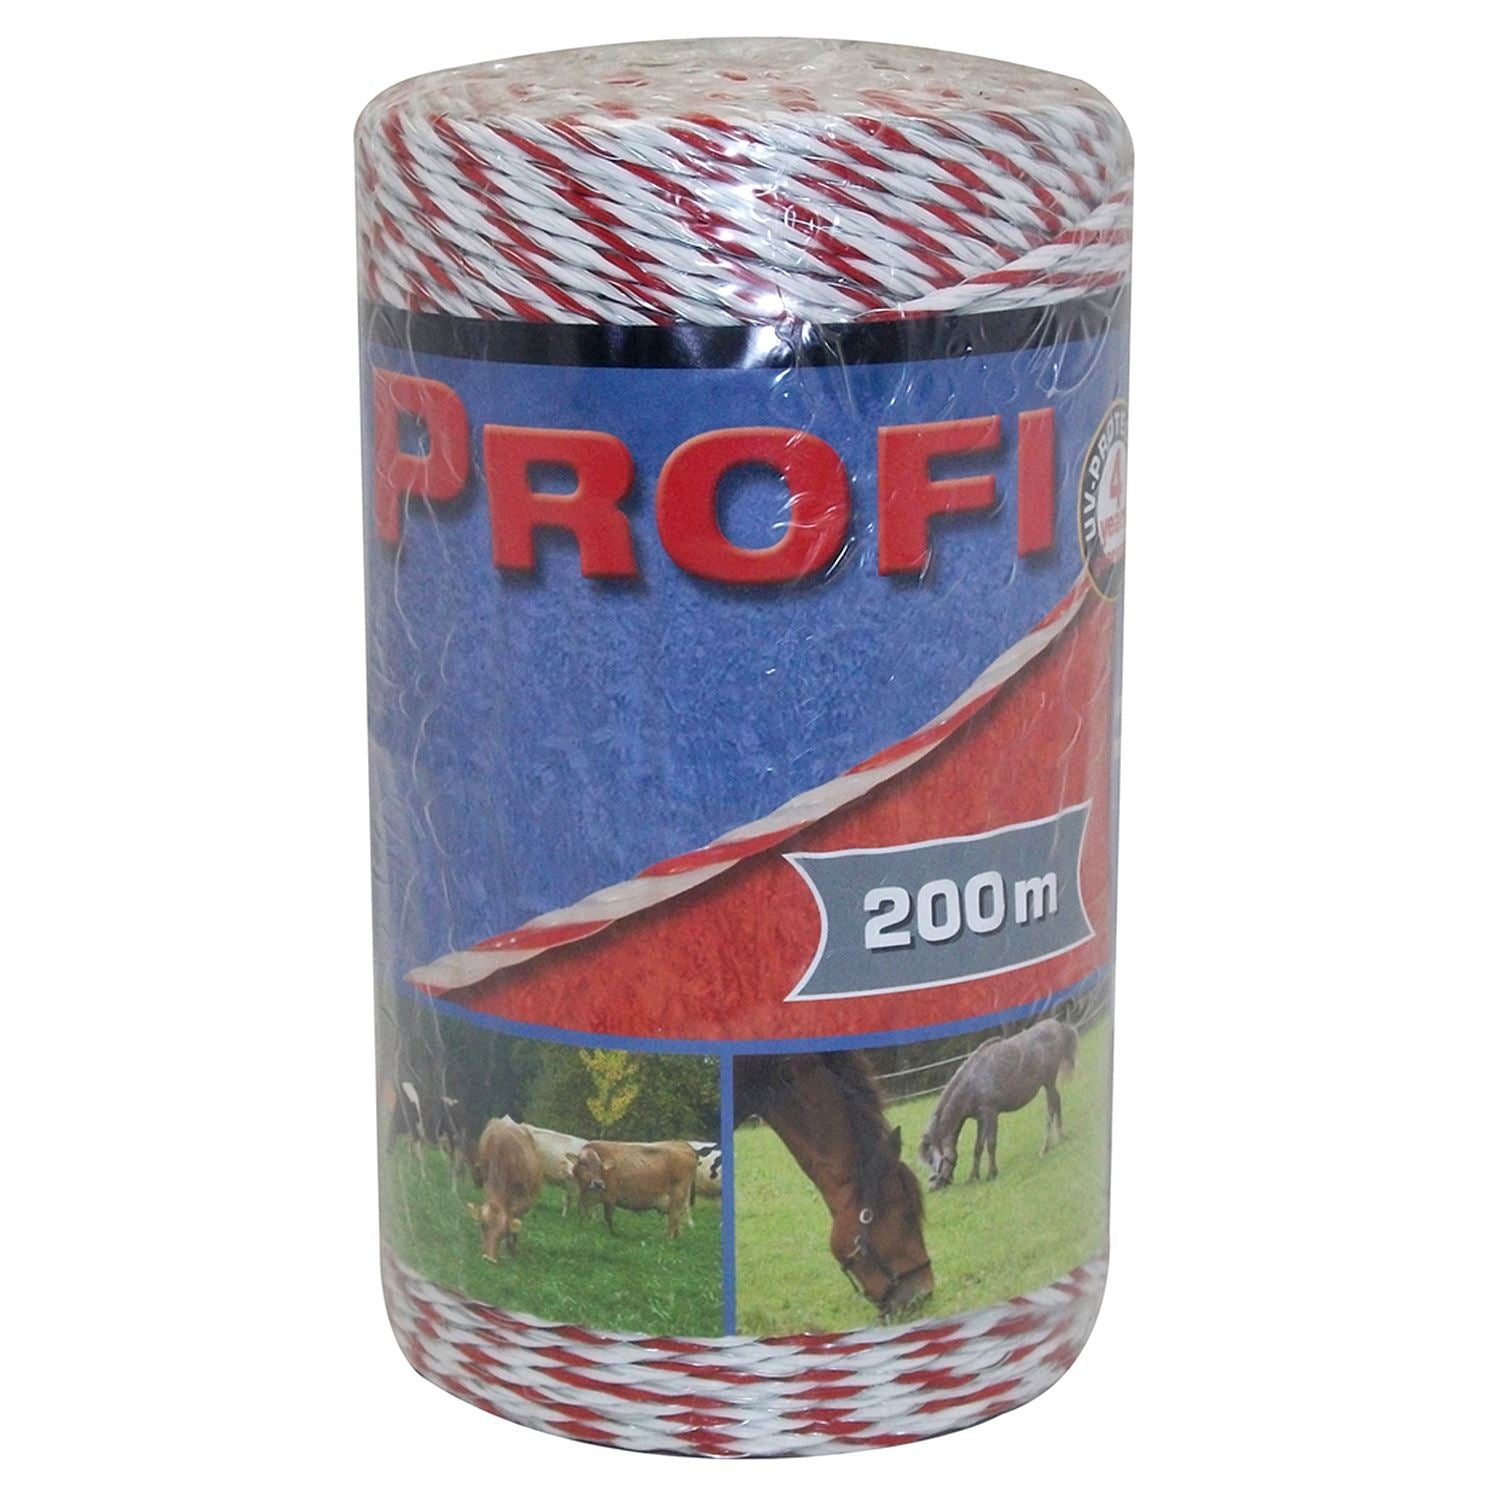 Corral Profi Fencing Polywire - Just Horse Riders